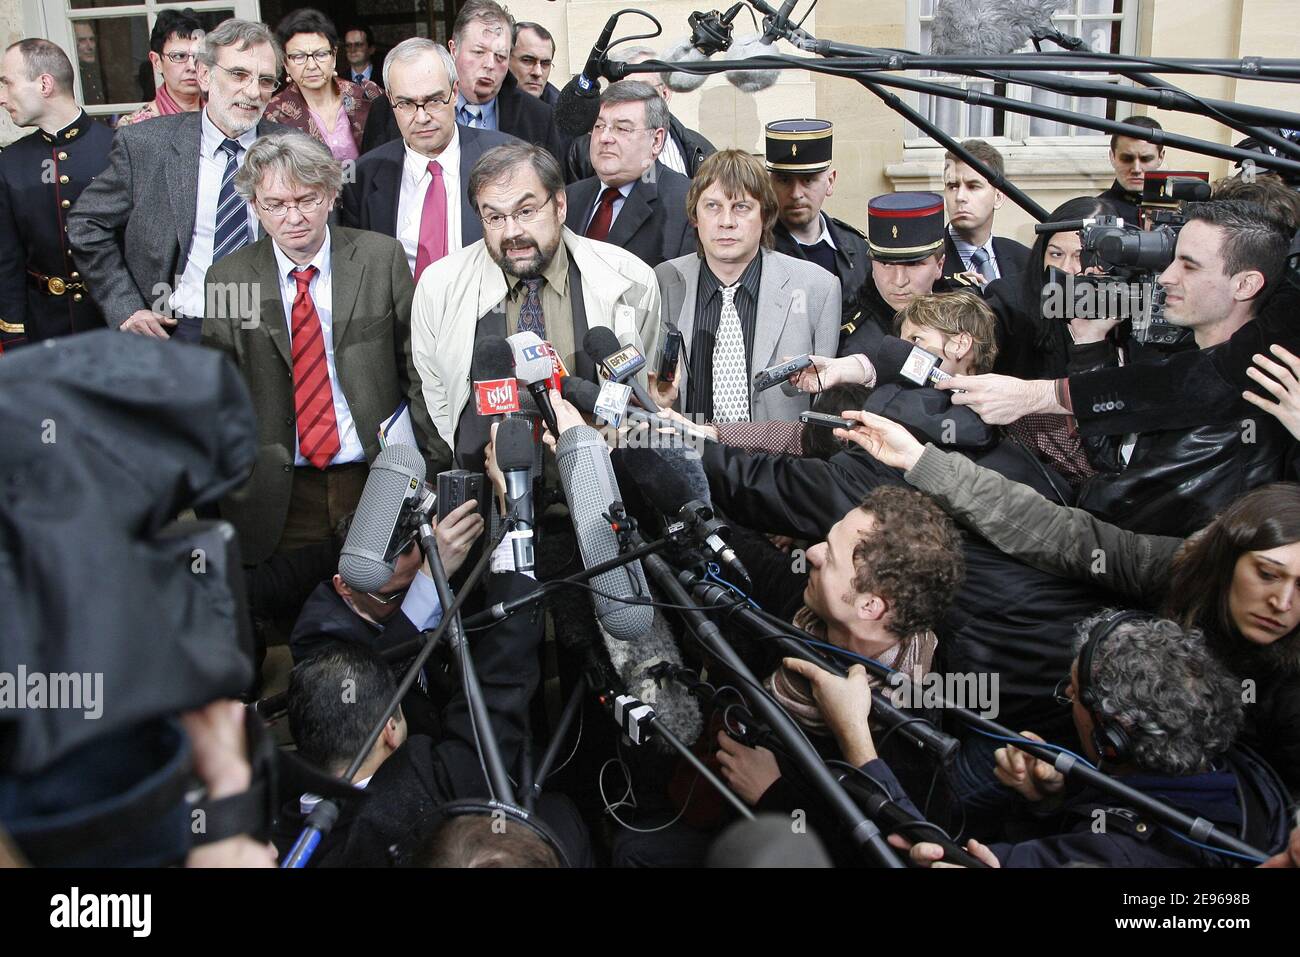 Unionists Bernard Thibault (CGT) (R), Francois Chereque (C), Jean-Claude  Mailly (FO) (L), Jacques Voisin (2nd rowL) (CFTC), et Jean-Marc Icard (2nd  Row C) (CFE-CGC) answer to journalists as they a meeting with